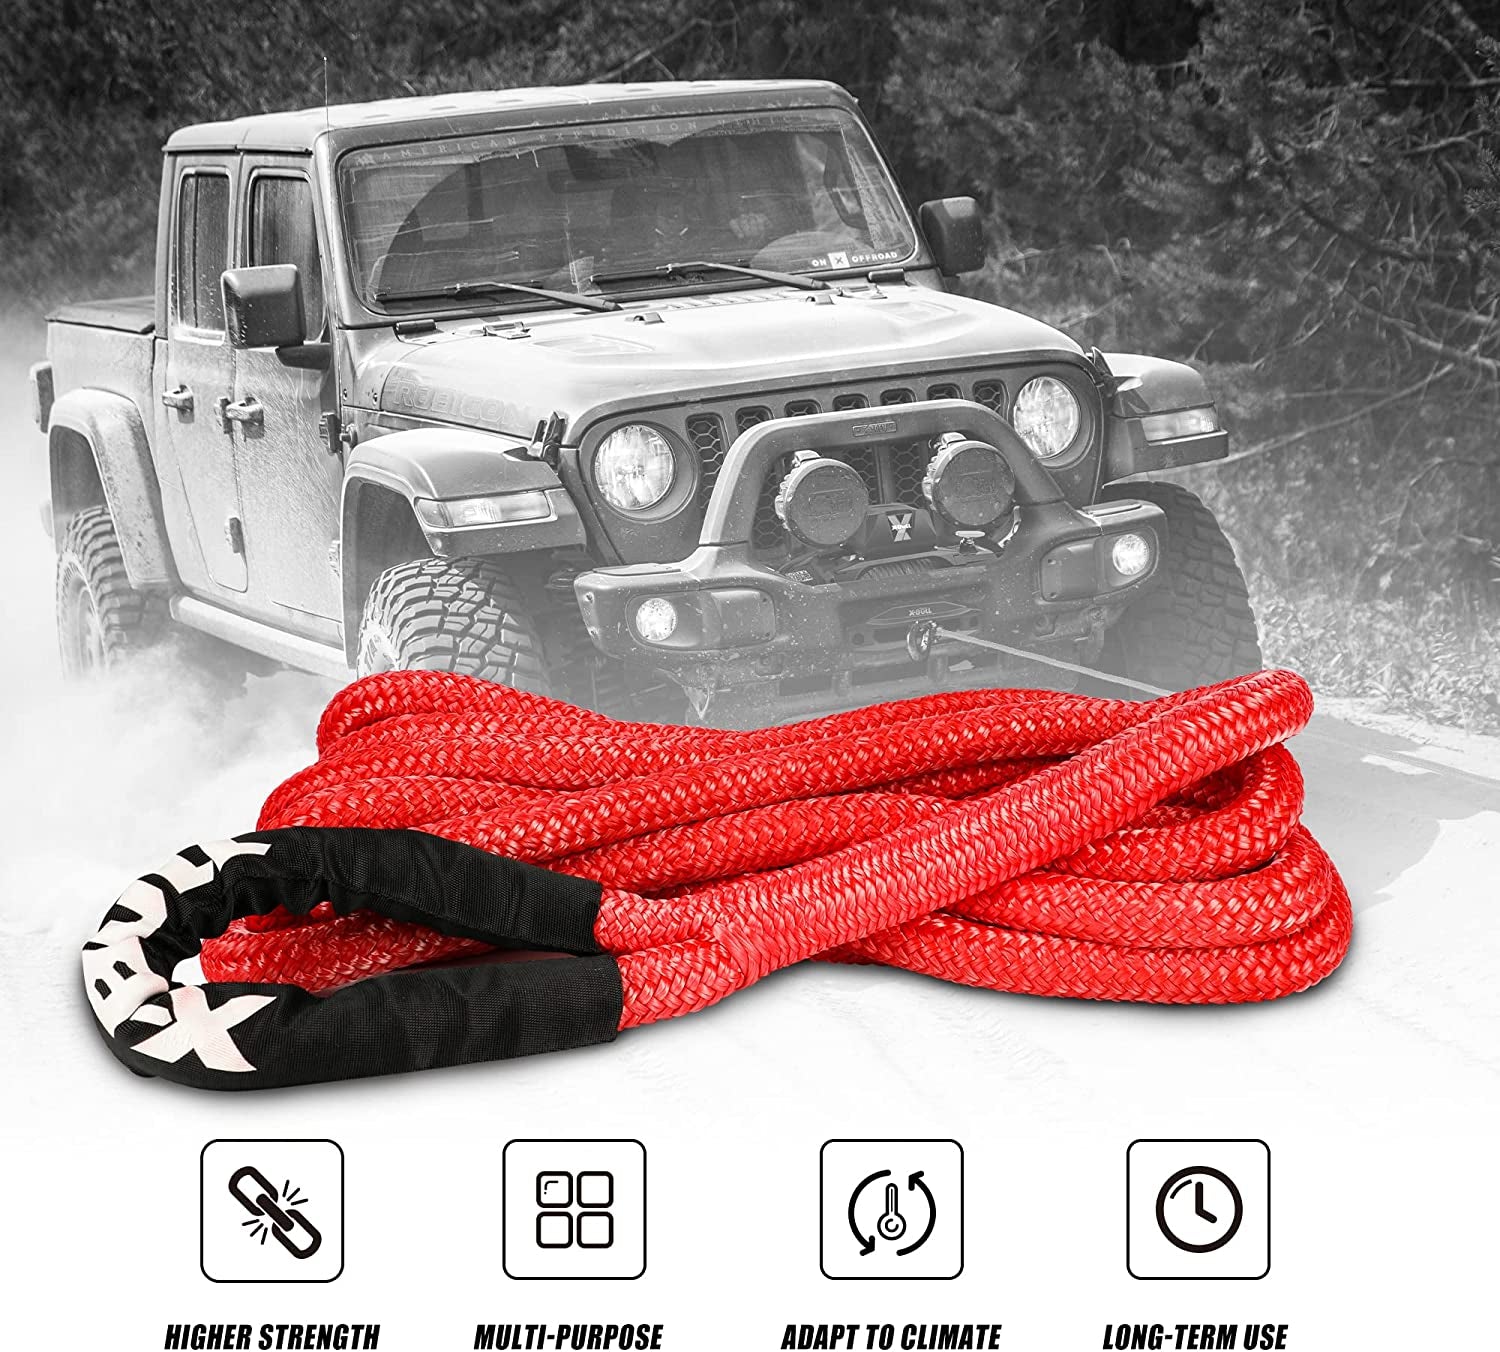 JUVENED 3/4" X 20' Kinetic Recovery Tow Rope (27,500Lbs) Red Heavy-Duty Power Stretch Snatch Rope for Car Offroad Vehicle 4X4 4WD ATV UTV SUV